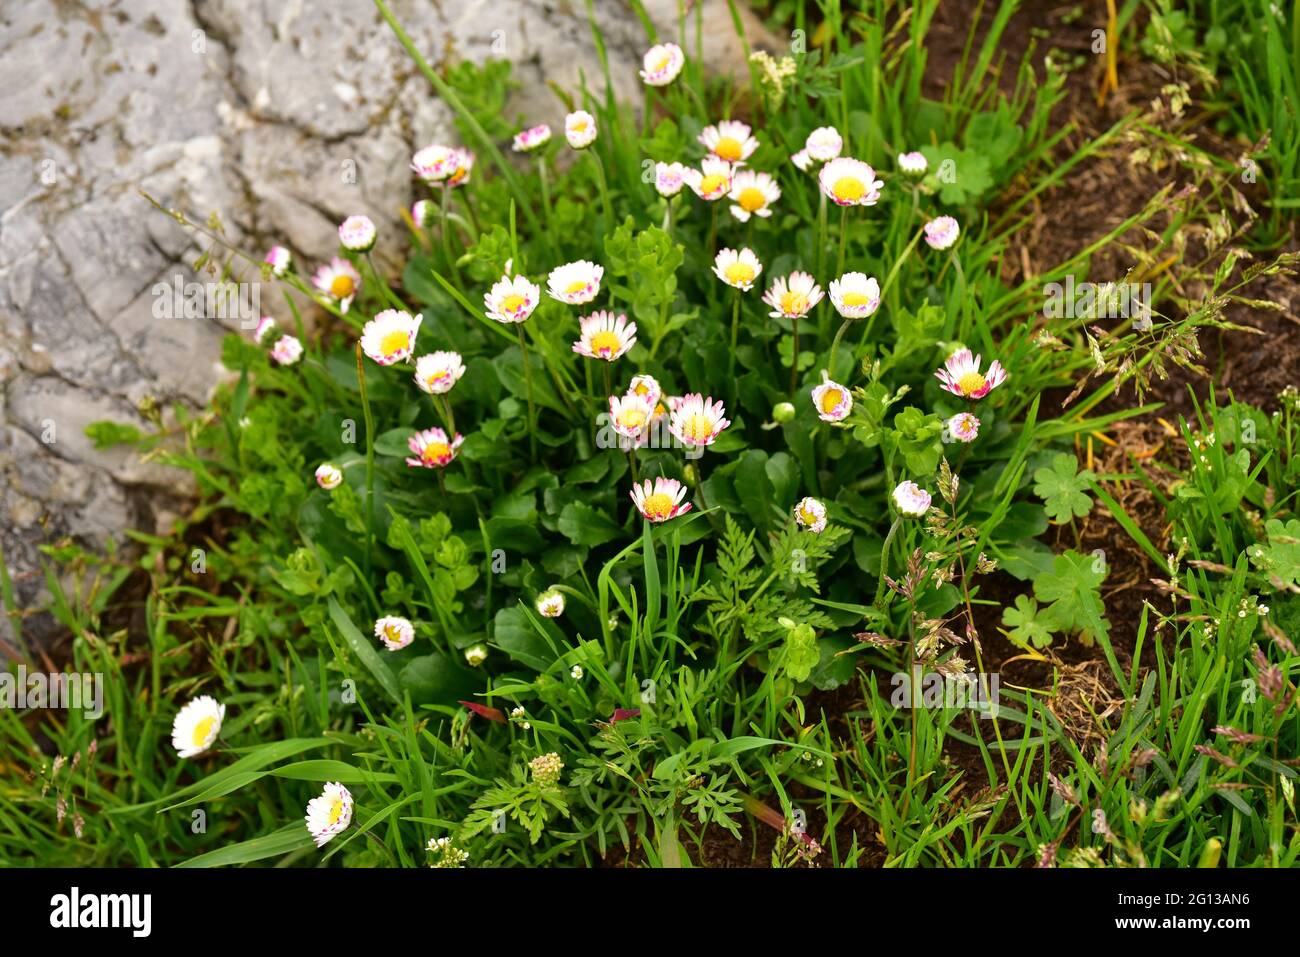 Daisy (Bellis perennis) is a perennial herb native to Europe. This photo was taken in Babia, Leon, Castilla y Leon, Spain. Stock Photo